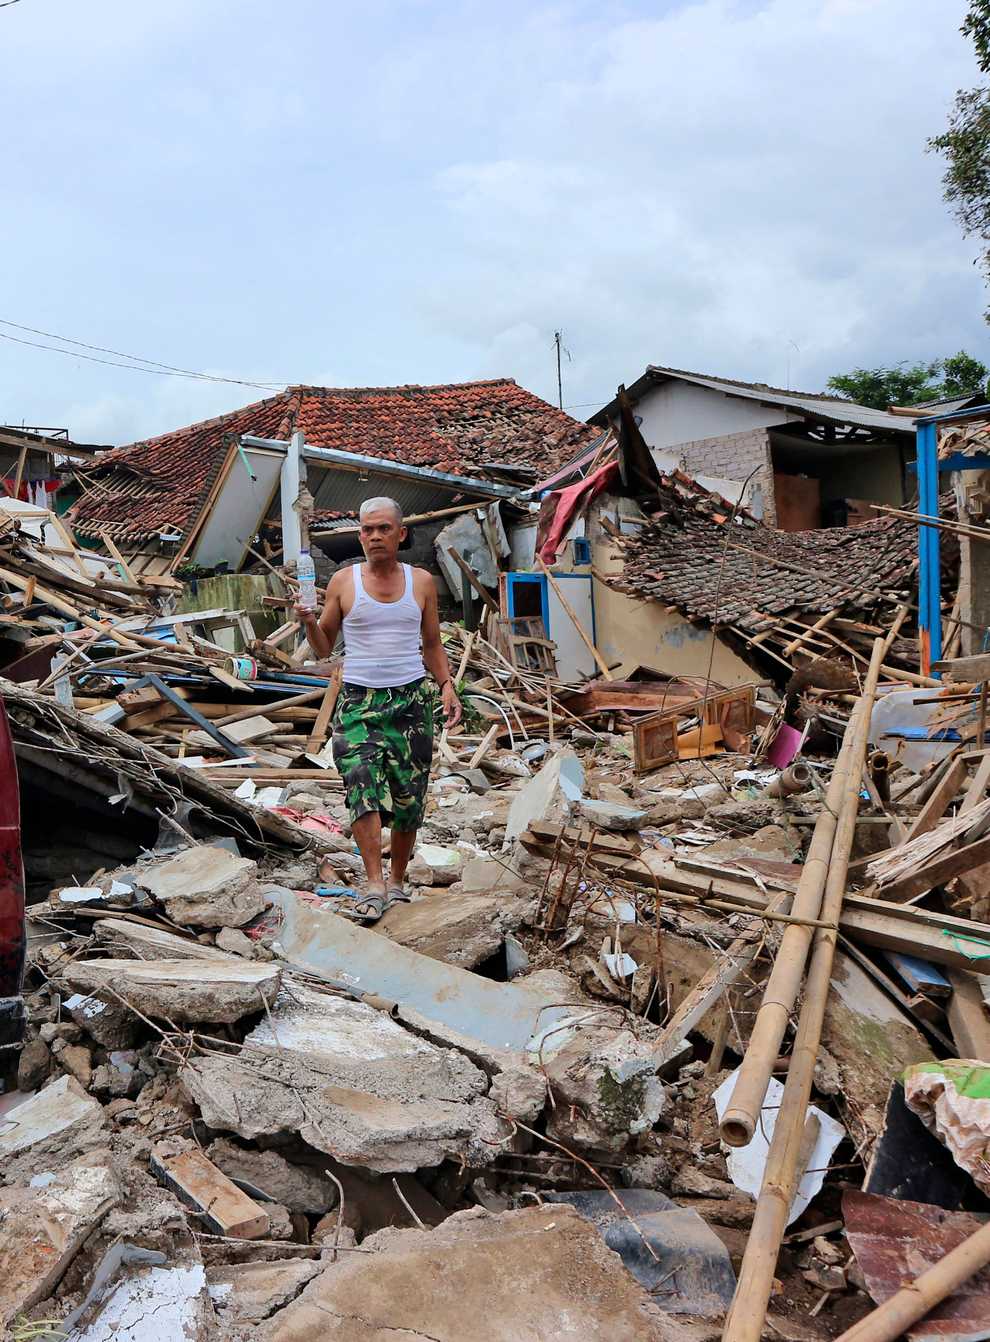 A man walks on the rubble of houses in a neighbourhood heavily affected by Monday’s earthquake in Cianjur, West Java, Indonesia (Rangga Firmansyah/AP)